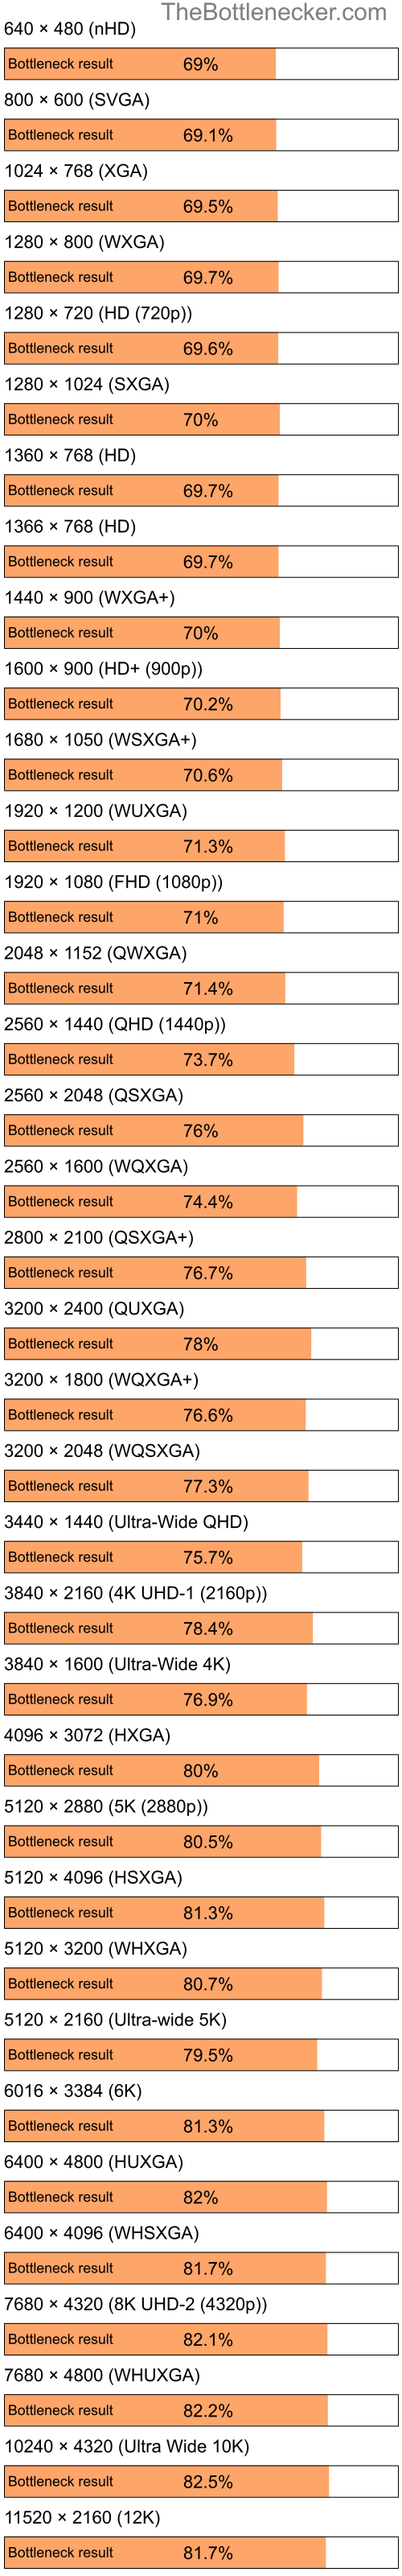 Bottleneck results by resolution for Intel Pentium 4 and AMD Radeon 9800 PRO in General Tasks